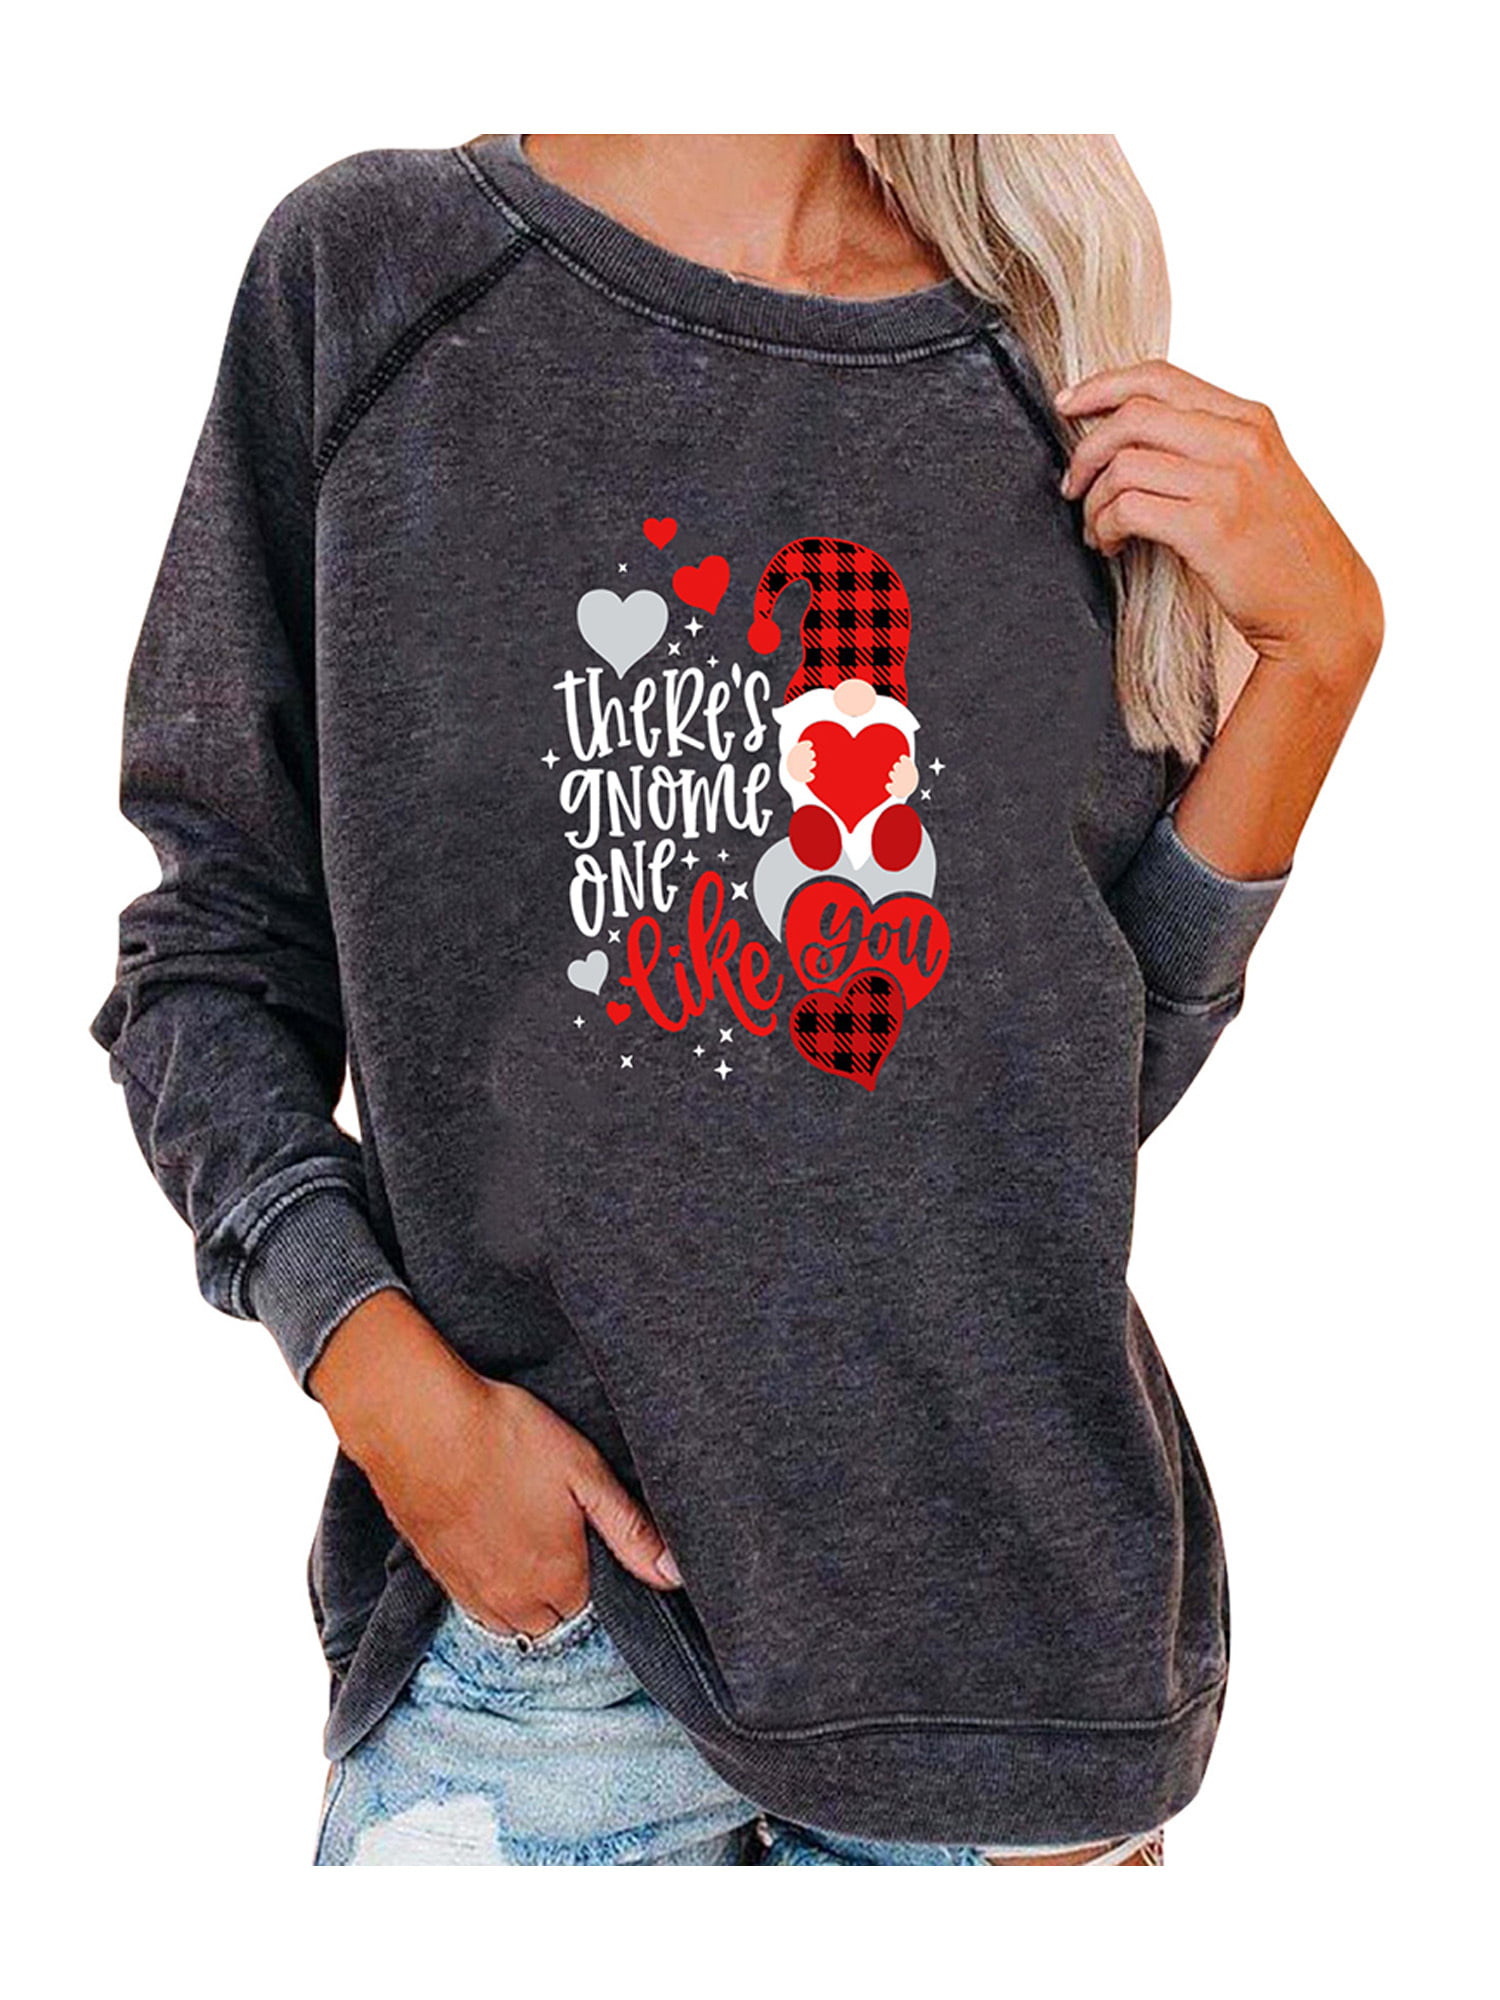 Long Sleeve Valentines Day Shirts for Women Cute Casual Loose Fit Love Letter Print Gnome Graphic Tees Pullover Tops